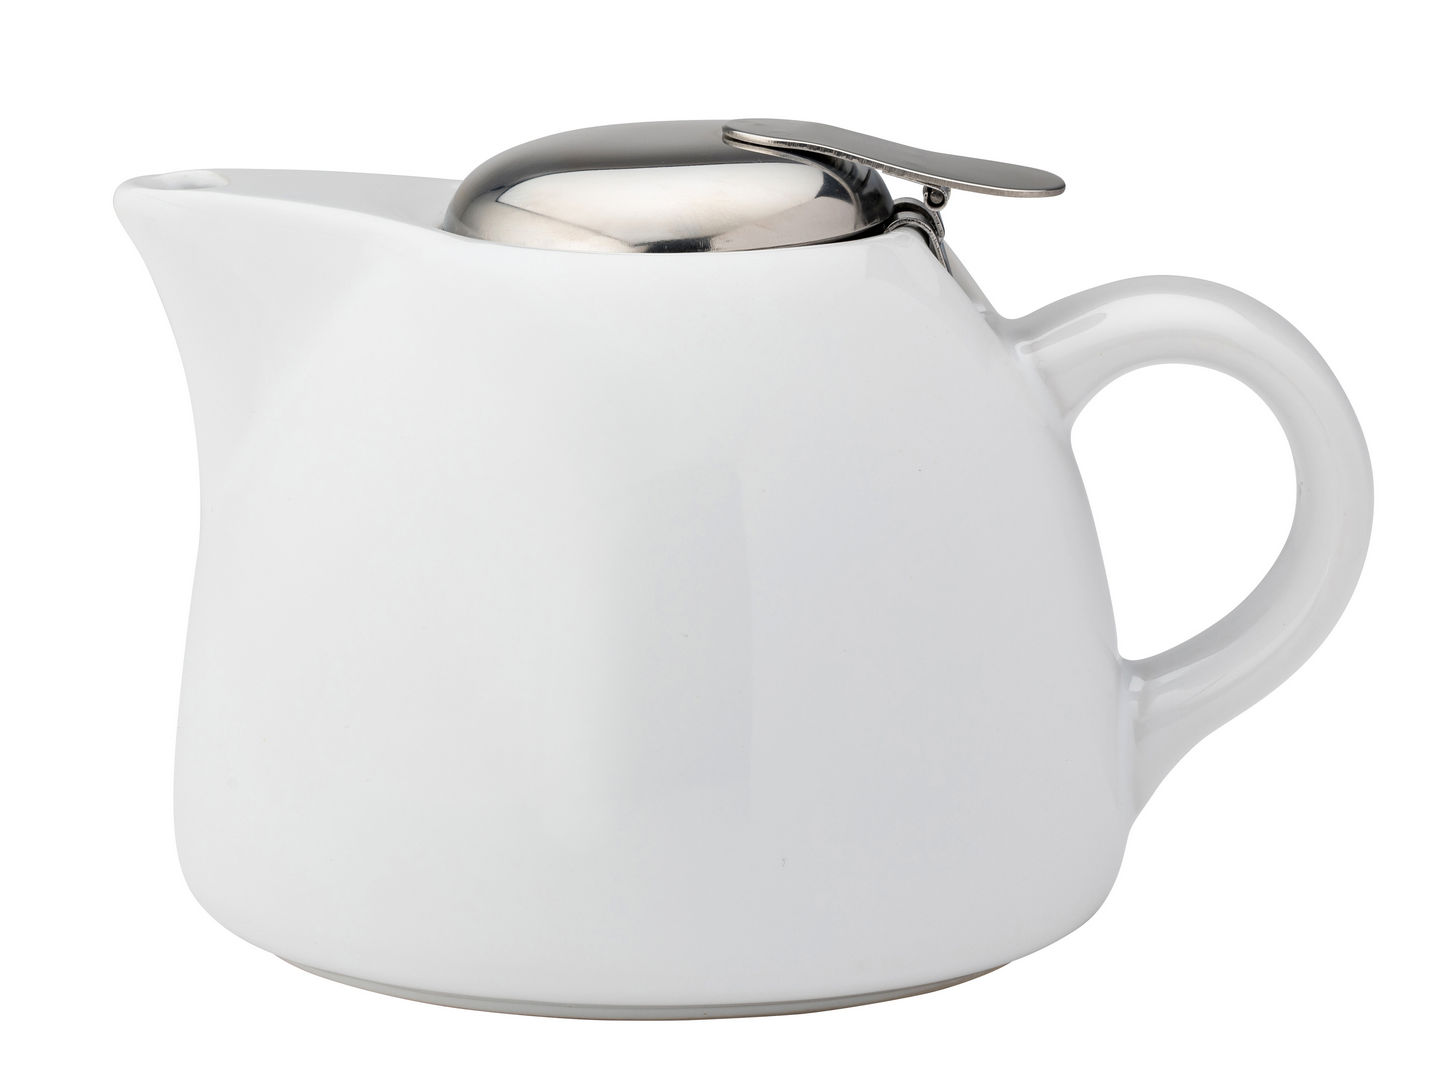 Barista White Teapot 15oz (45cl) - CT9019-000000-B01006 (Pack of 6)